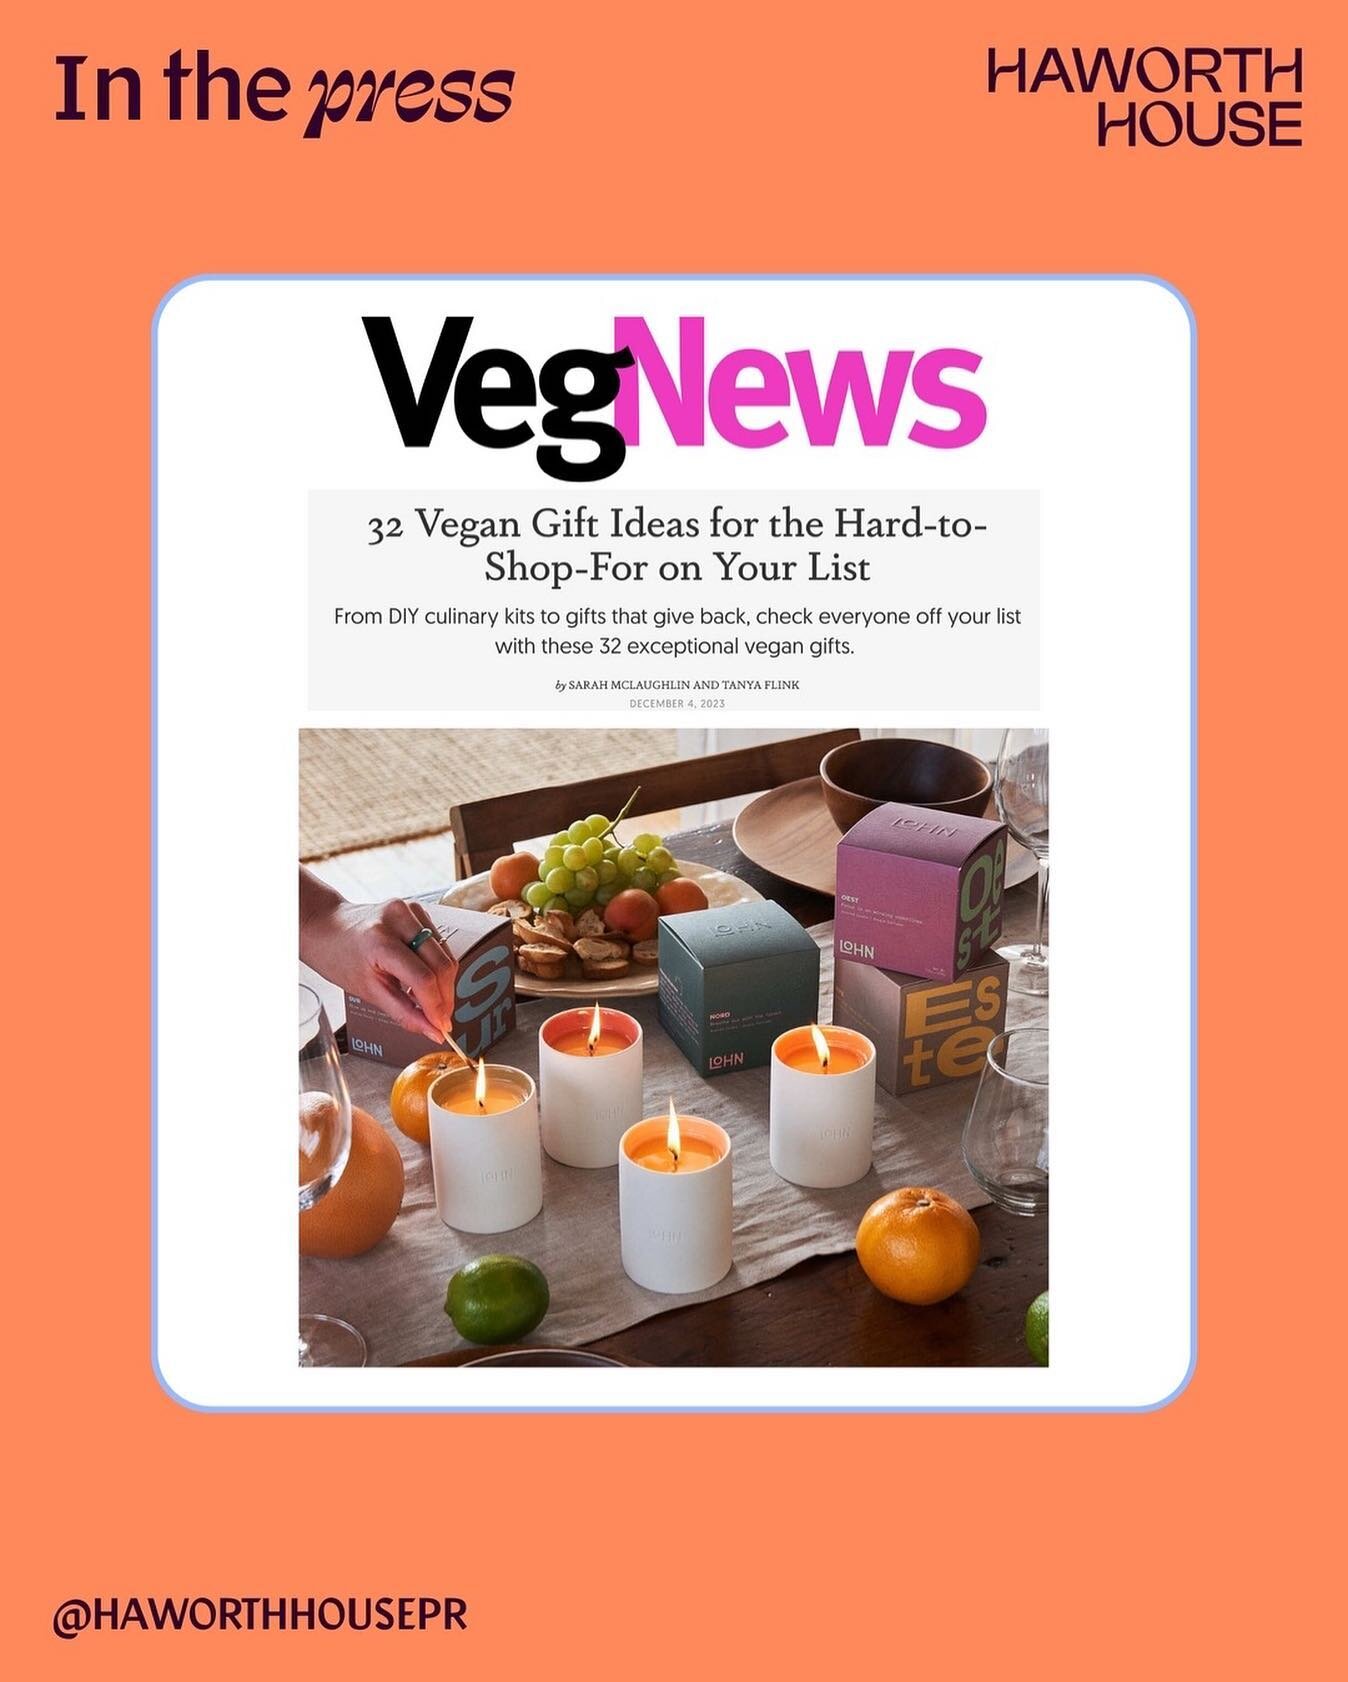 LOHN&rsquo;s Forage collection featured as a vegan gift idea in @vegnews 🌱🗞 Thank you @sarahmclaughlin for including them 🫶